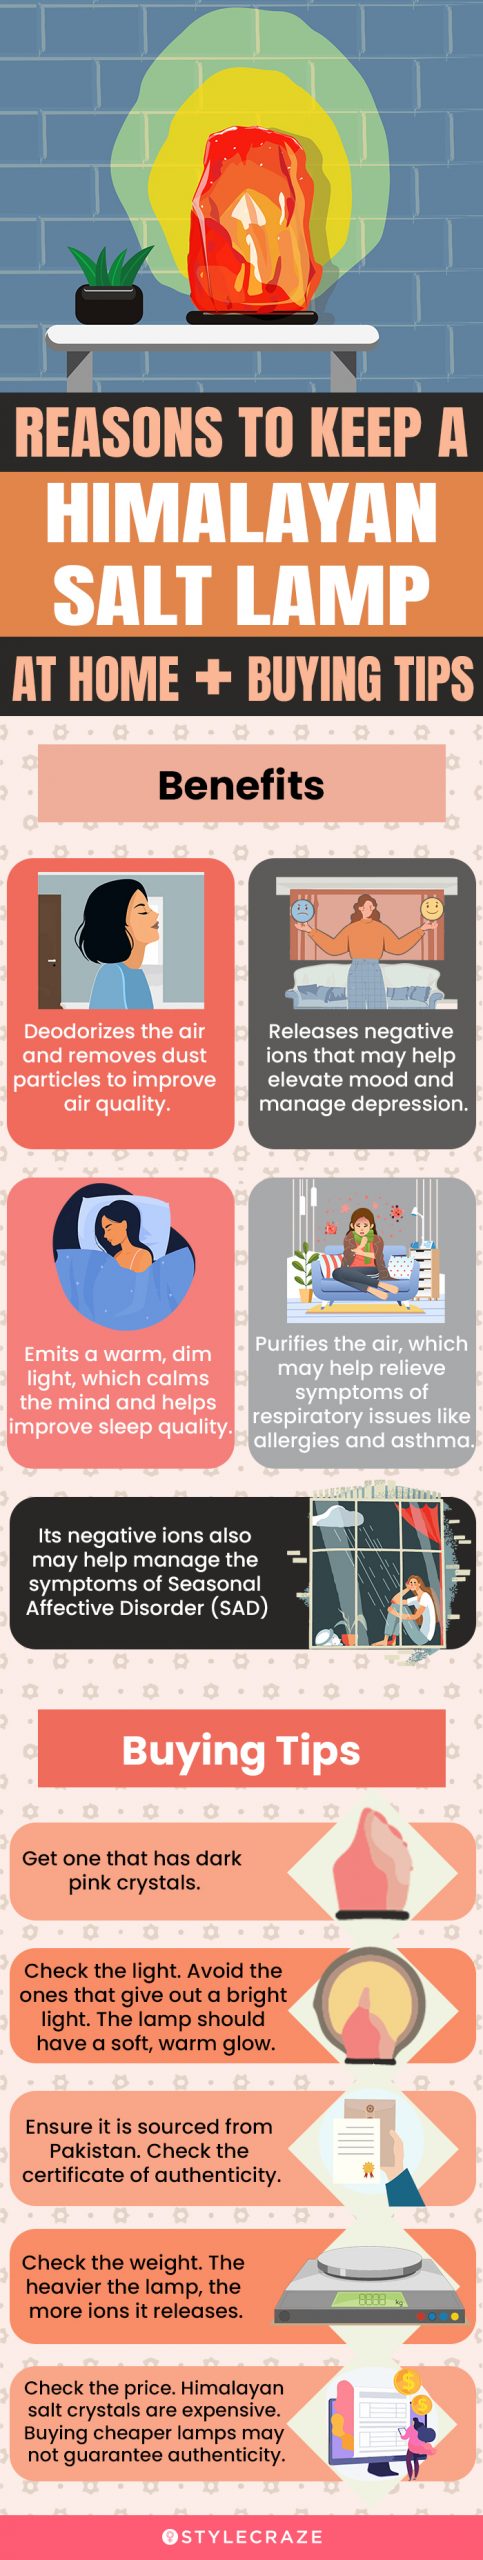 reasons to keep a himalayan salt lamp at home and buying tips (infographic)